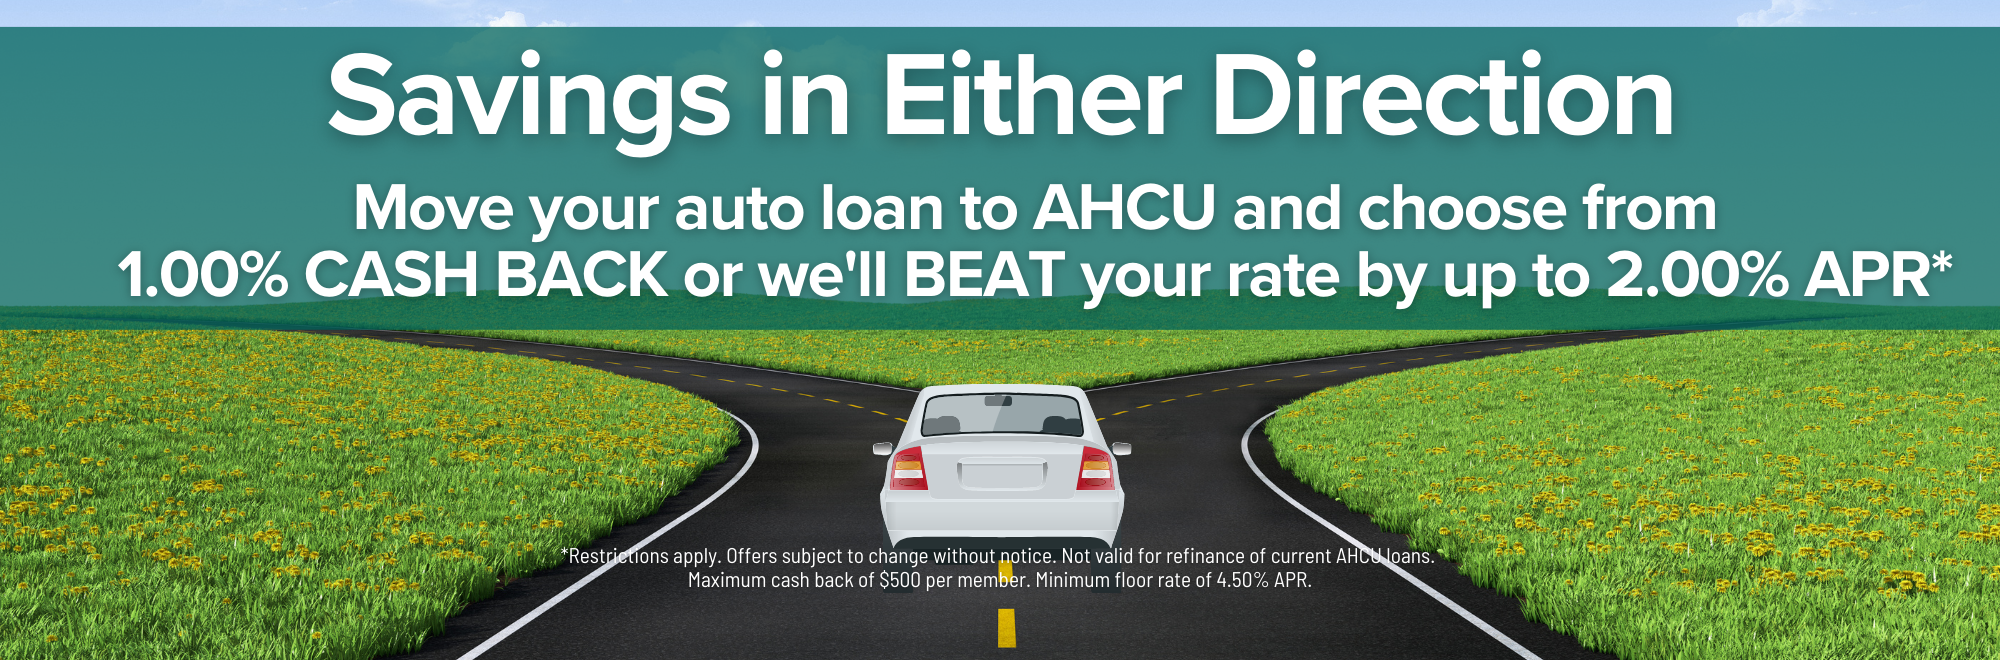 Move your auto loan to AHCU and choose from 1.00% cash back or we'll beat your rate by up to 2.00% APR. Restrictions apply. Subject to change. Not valid for refinance of current AHCU loans. $500 Max cash back. Minimum floor rate 4.50% APR.